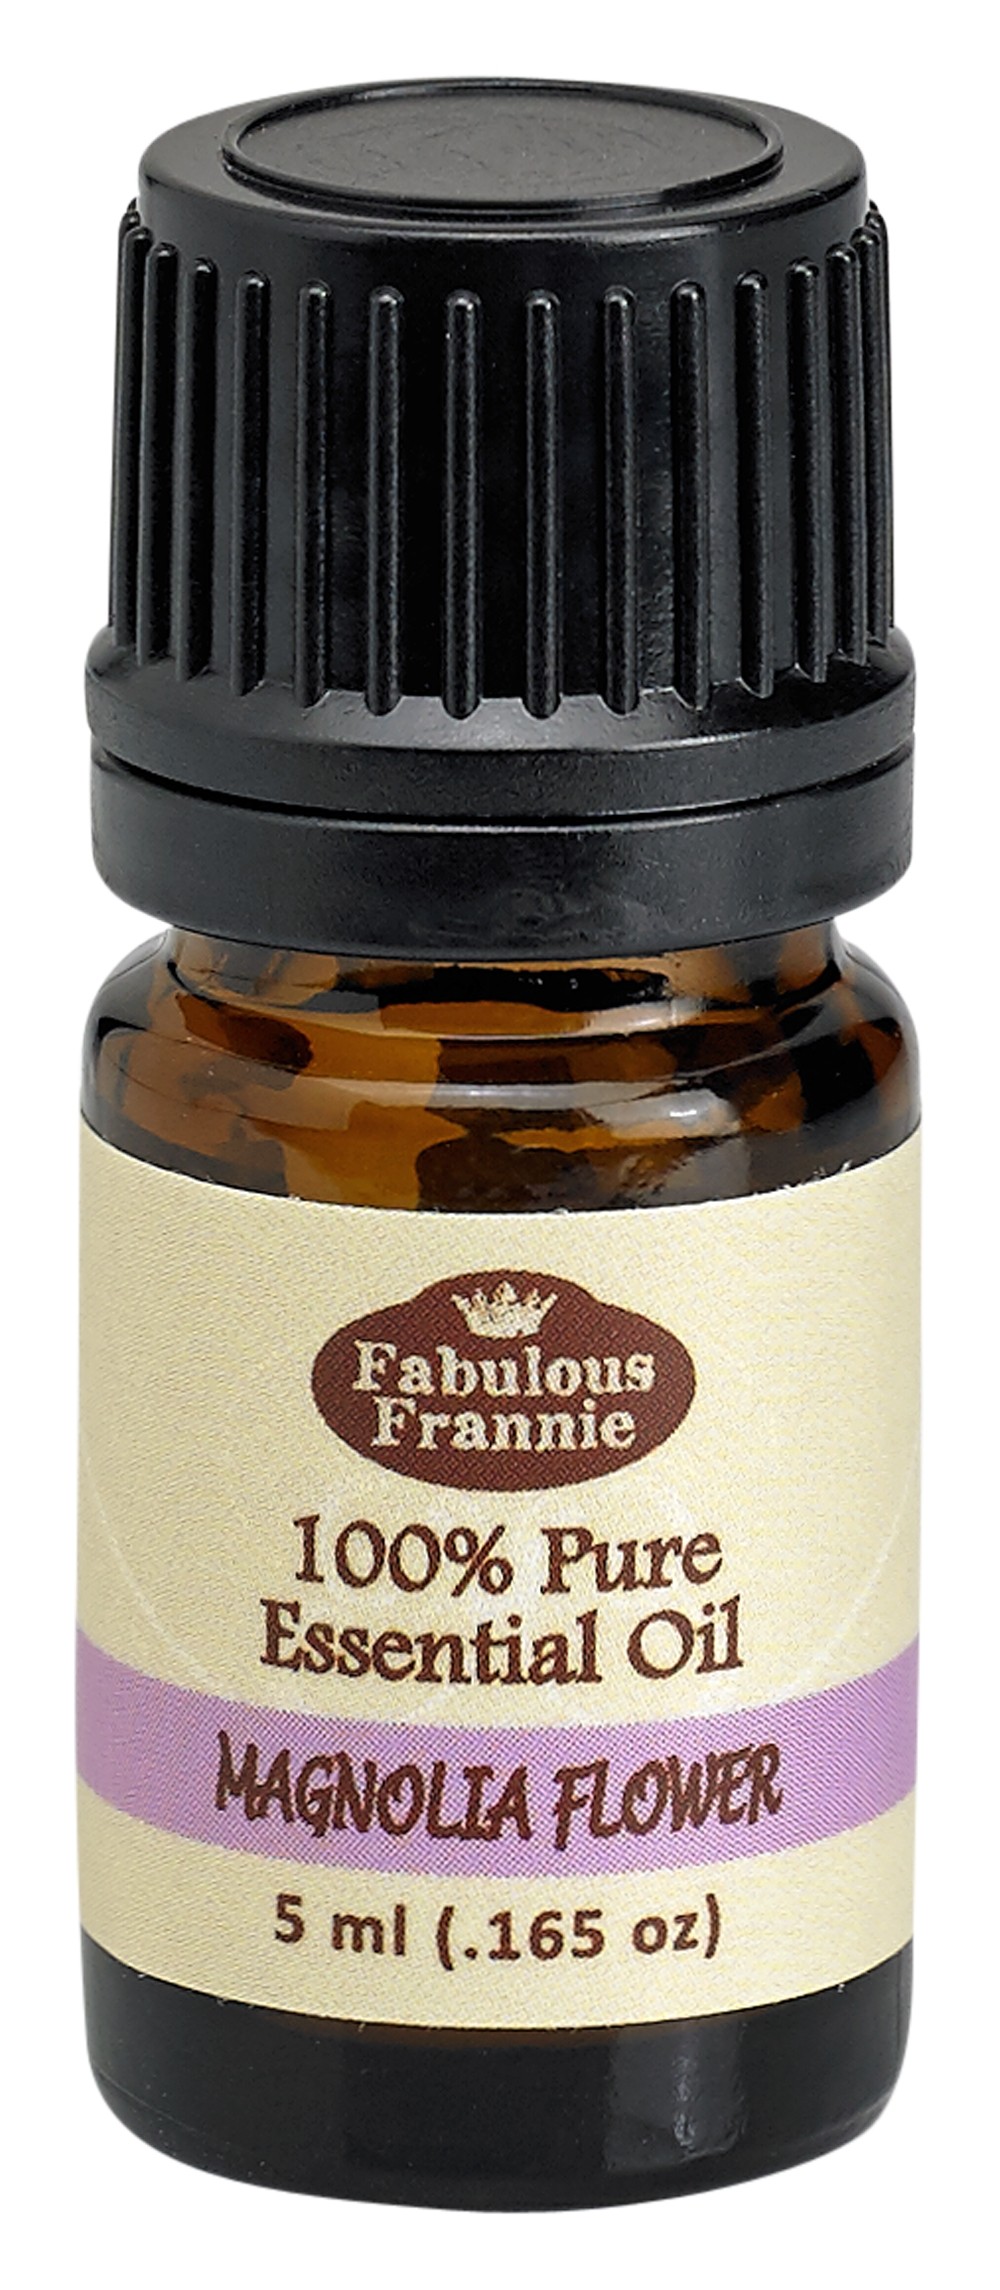 Magnolia Flower Pure Essential Oil - Essential Oils - Natural Essential Oil  Products by Fabulous Frannie